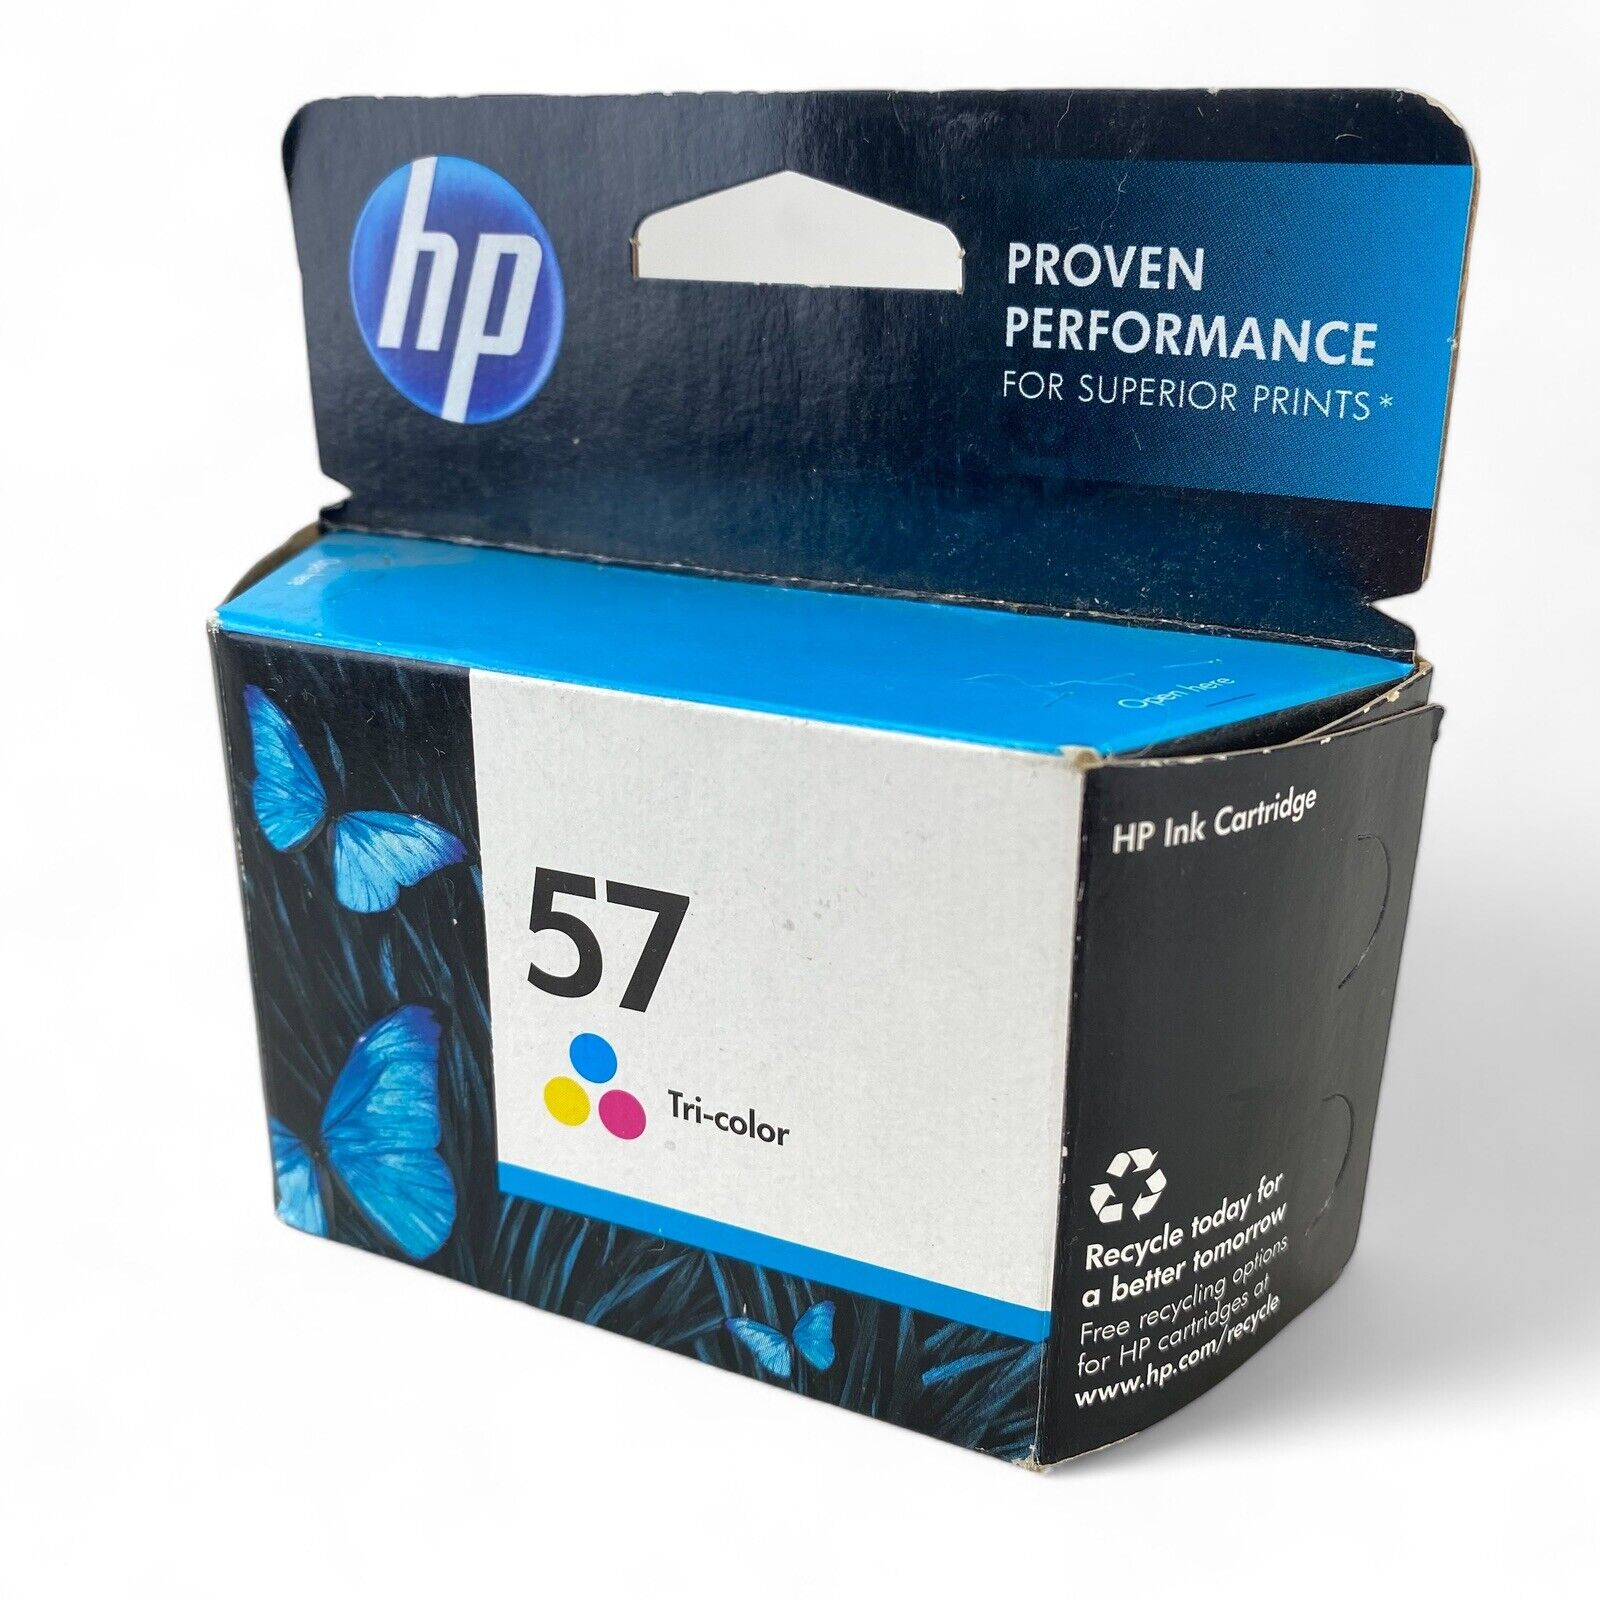 HP 57 Tri-color Ink Cartridge C6657AN Expired July 2016 Genuine & Factory SEALED